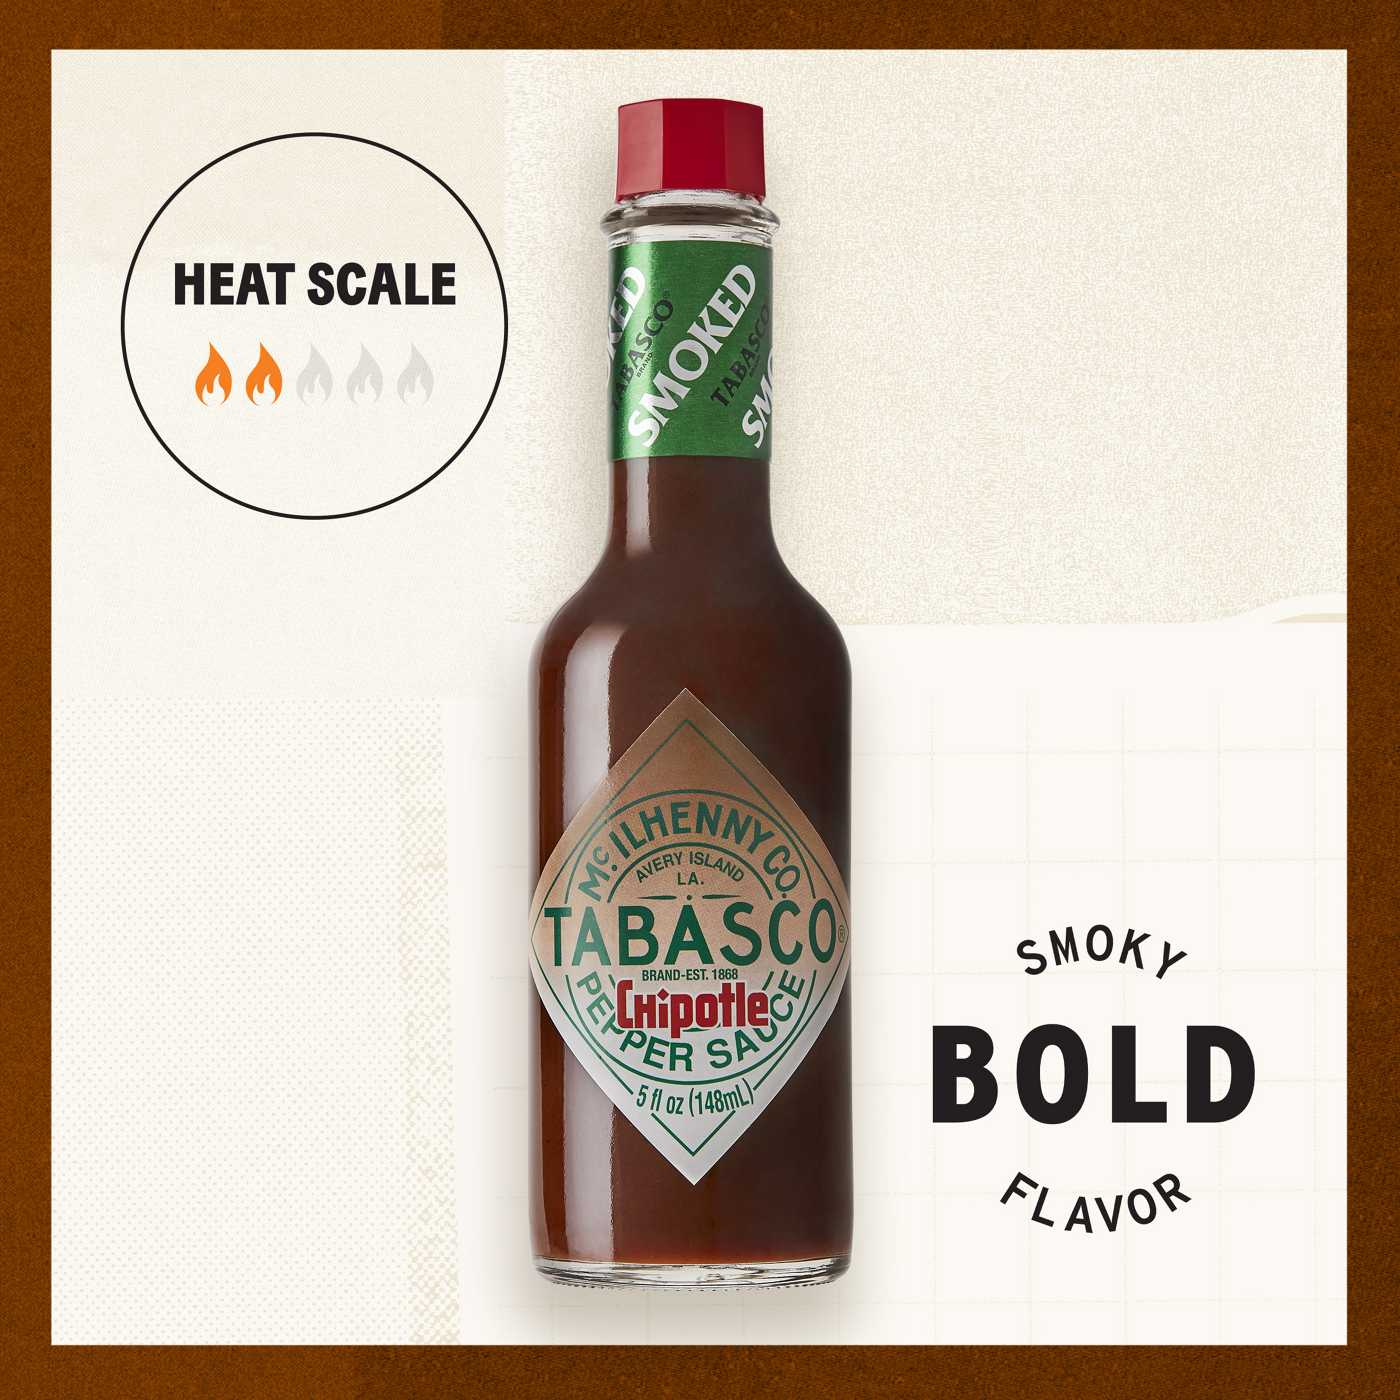 Tabasco Chipotle Pepper Sauce; image 8 of 8